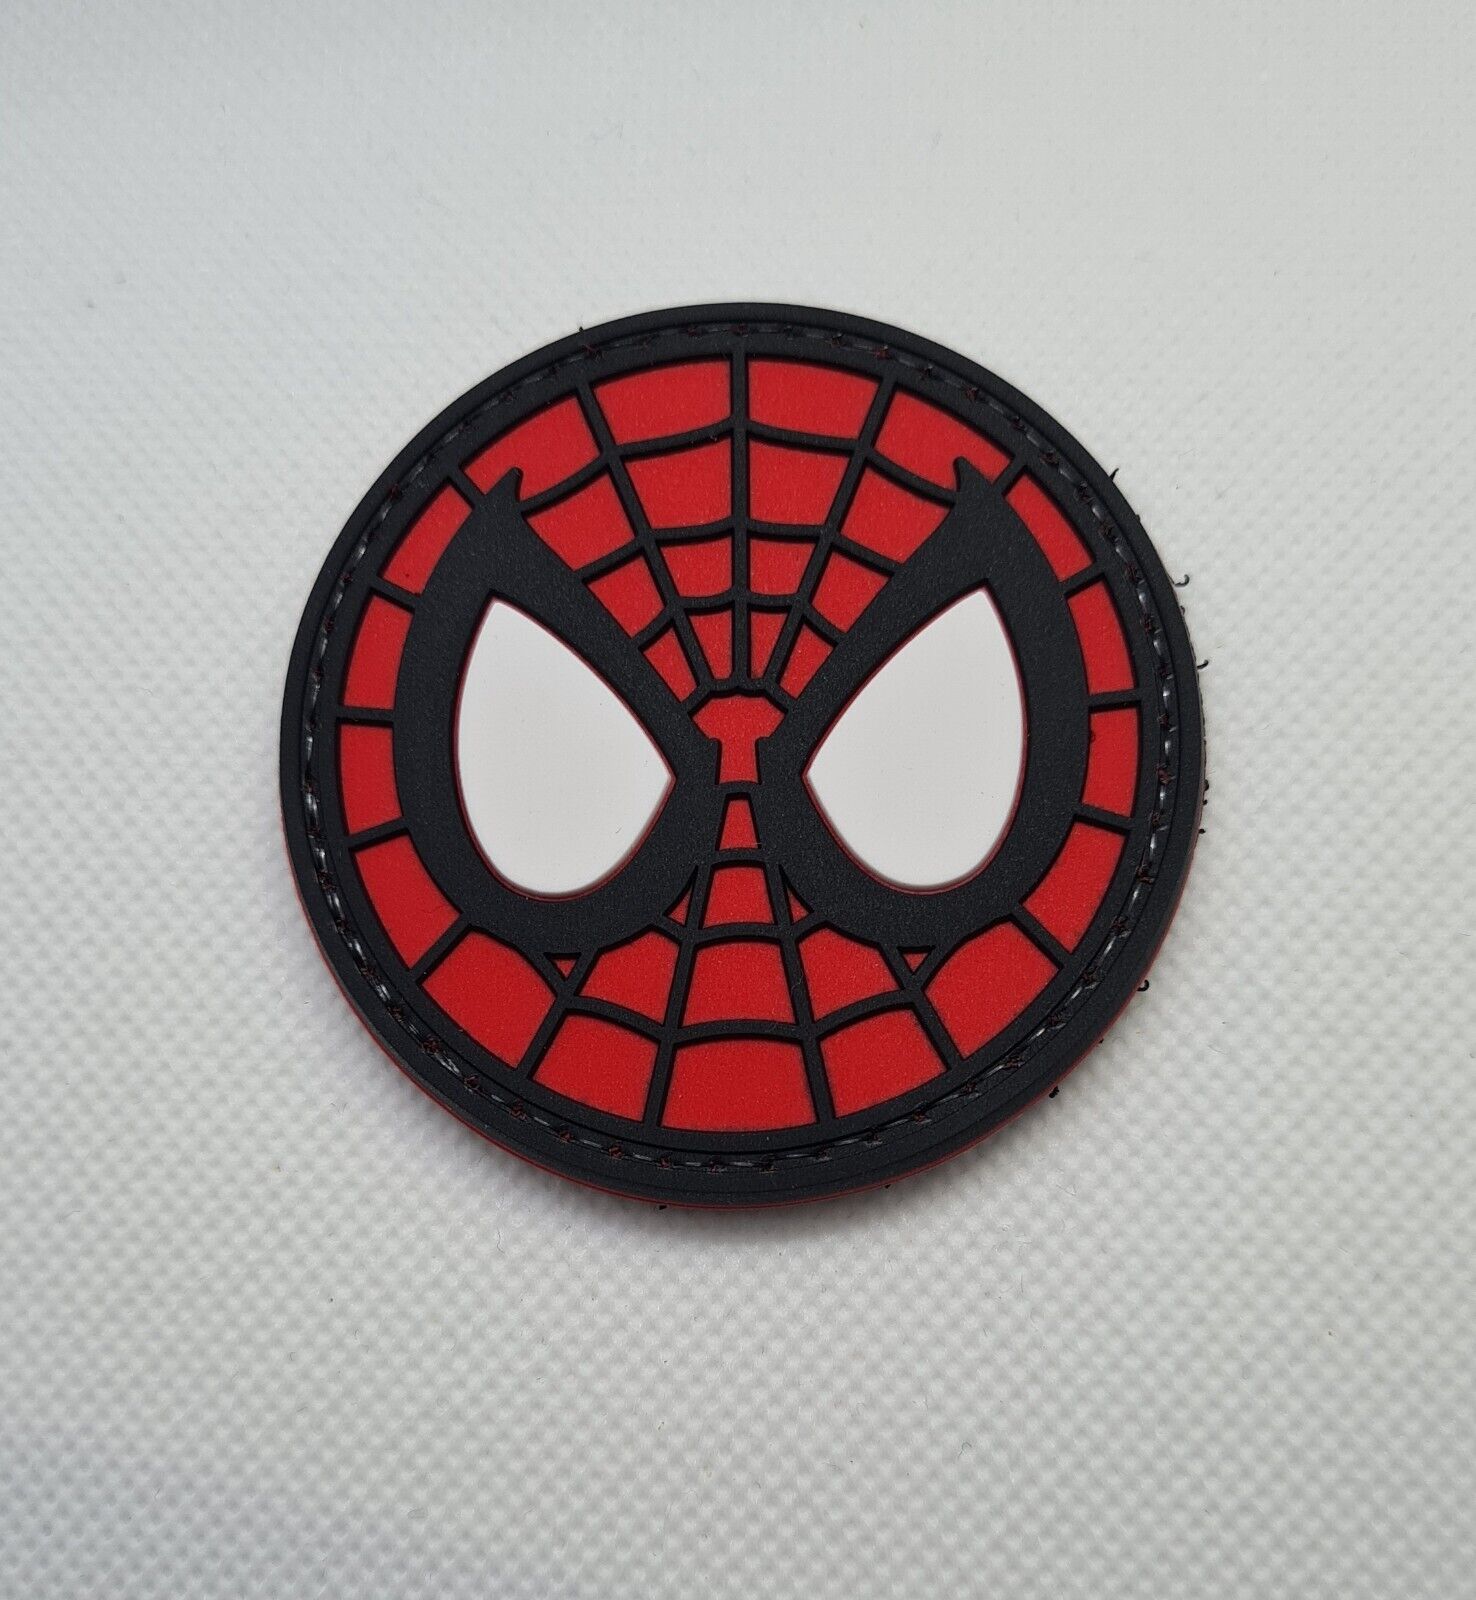 Spiderman Spiderweb 3D PVC Tactical Morale Patch – Hook Backed